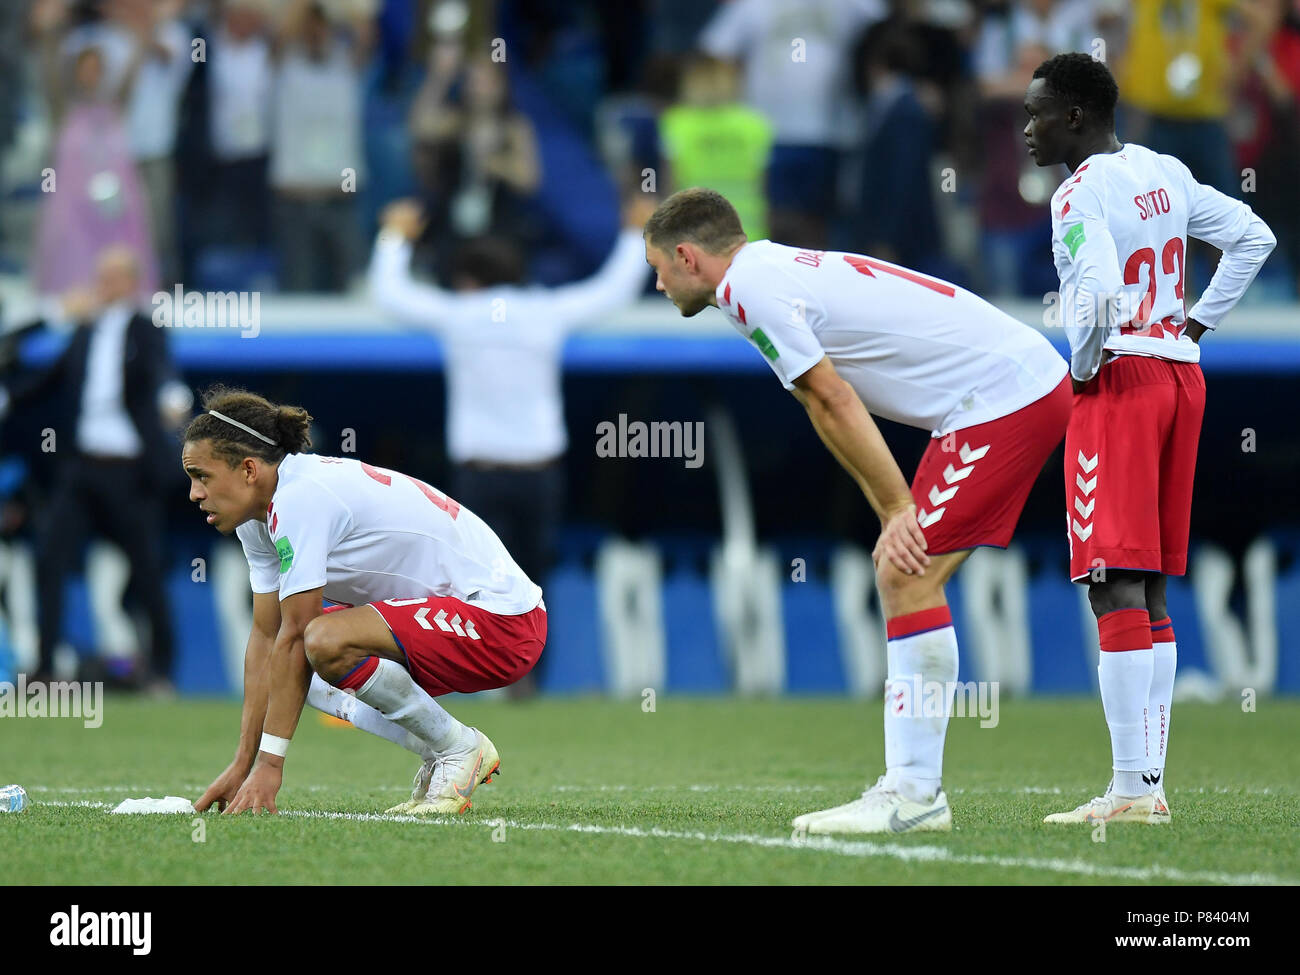 NIZHNY NOVGOROD, RUSSIA - JULY 01: Yussuf Yurary Poulsen of Denmark and Pione Sisto of Denmark are disappointed after the 2018 FIFA World Cup Russia Round of 16 match between Croatia and Denmark at Nizhny Novgorod Stadium on July 1, 2018 in Nizhny Novgorod, Russia. (Photo by Lukasz Laskowski/PressFocus/MB Media) Stock Photo